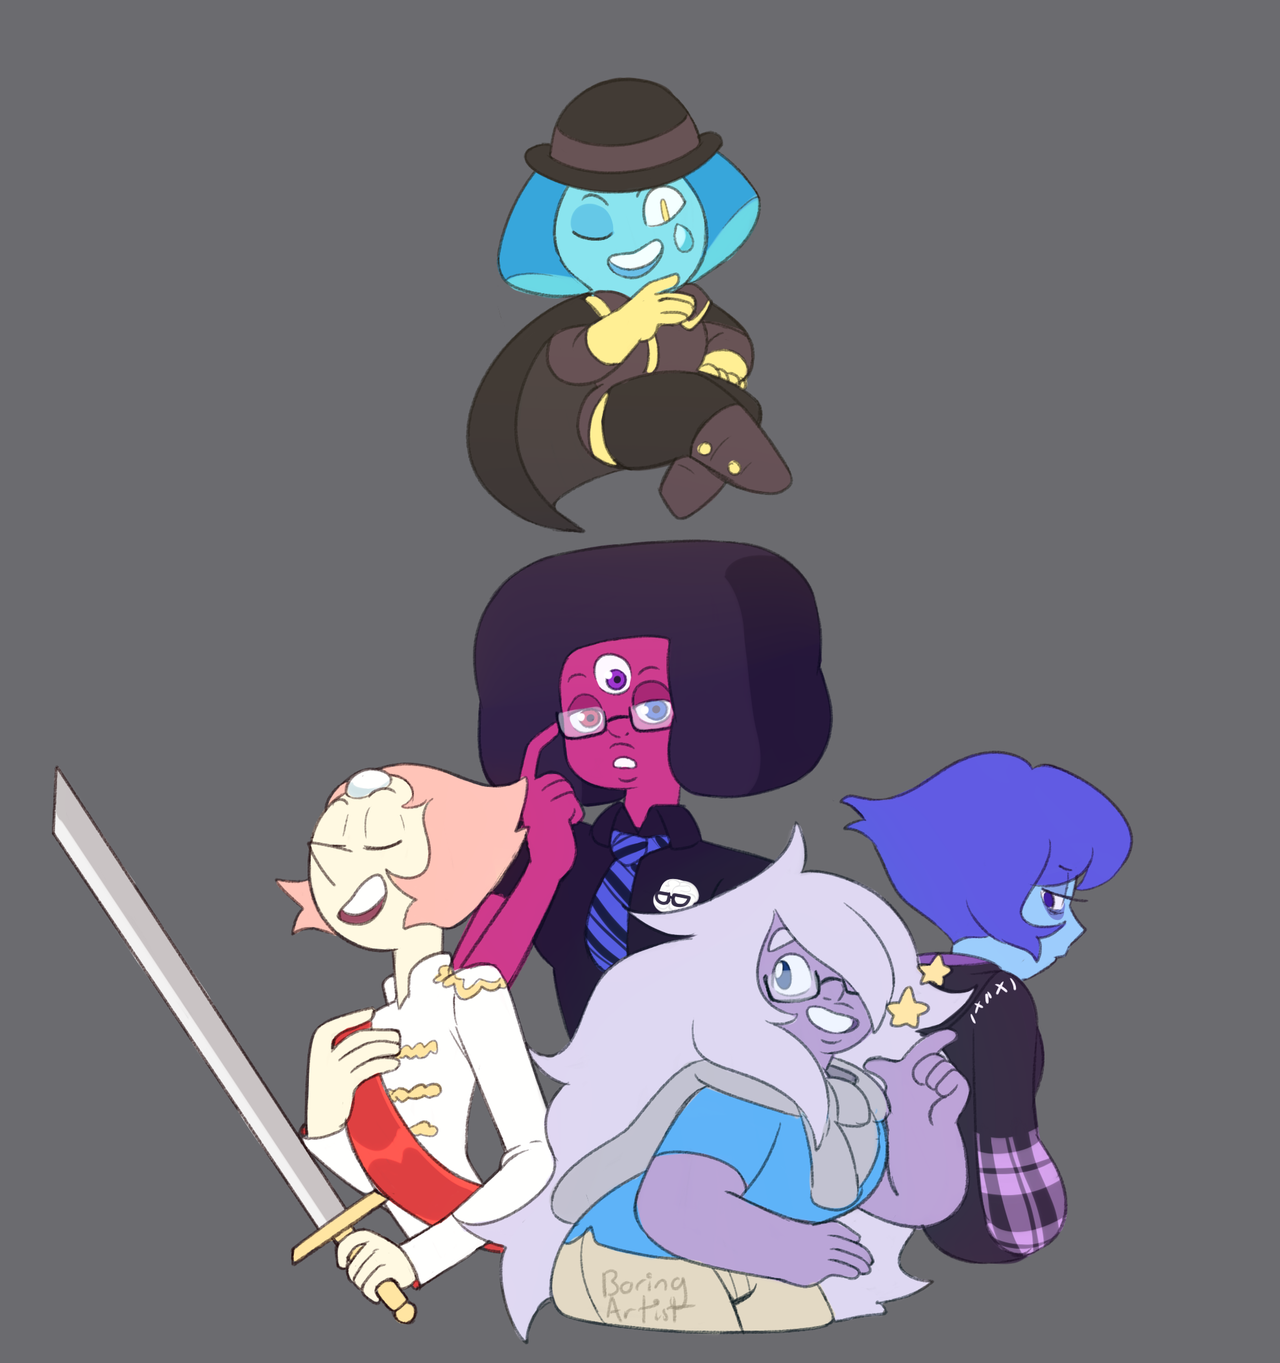 A series with 3 semi-paternal characters that aren’t quite human and more beings of that nature and their powers revealed? which show was that again? Fyi its the sides shapeshifted into the SU gems...